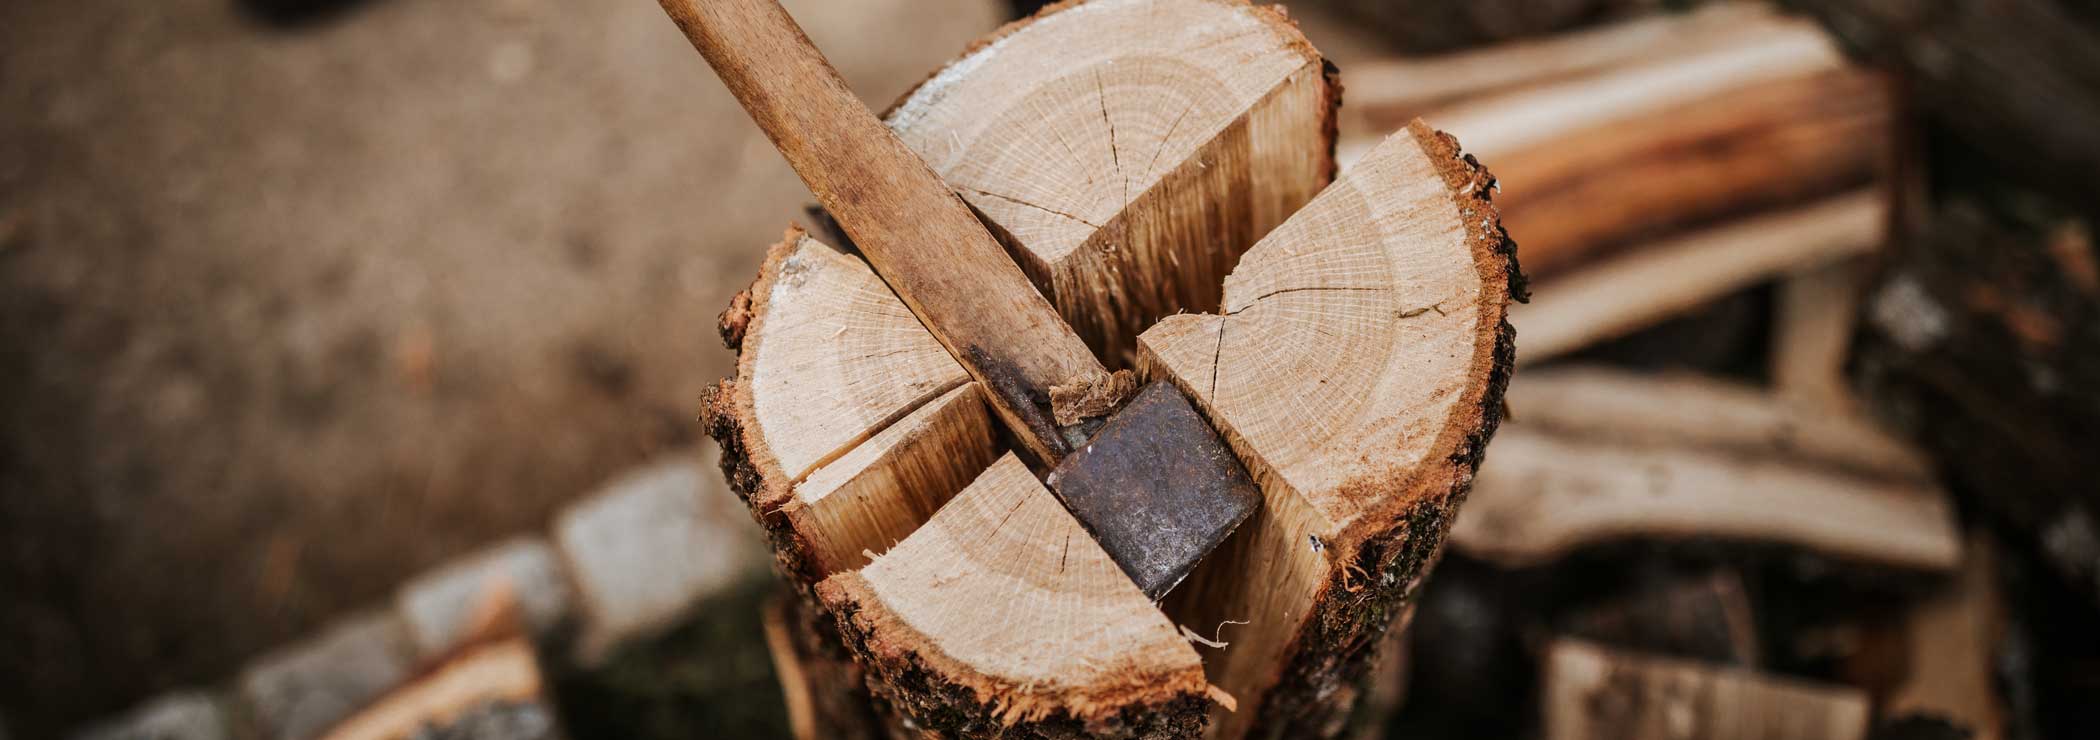 Firewood is split with an axe